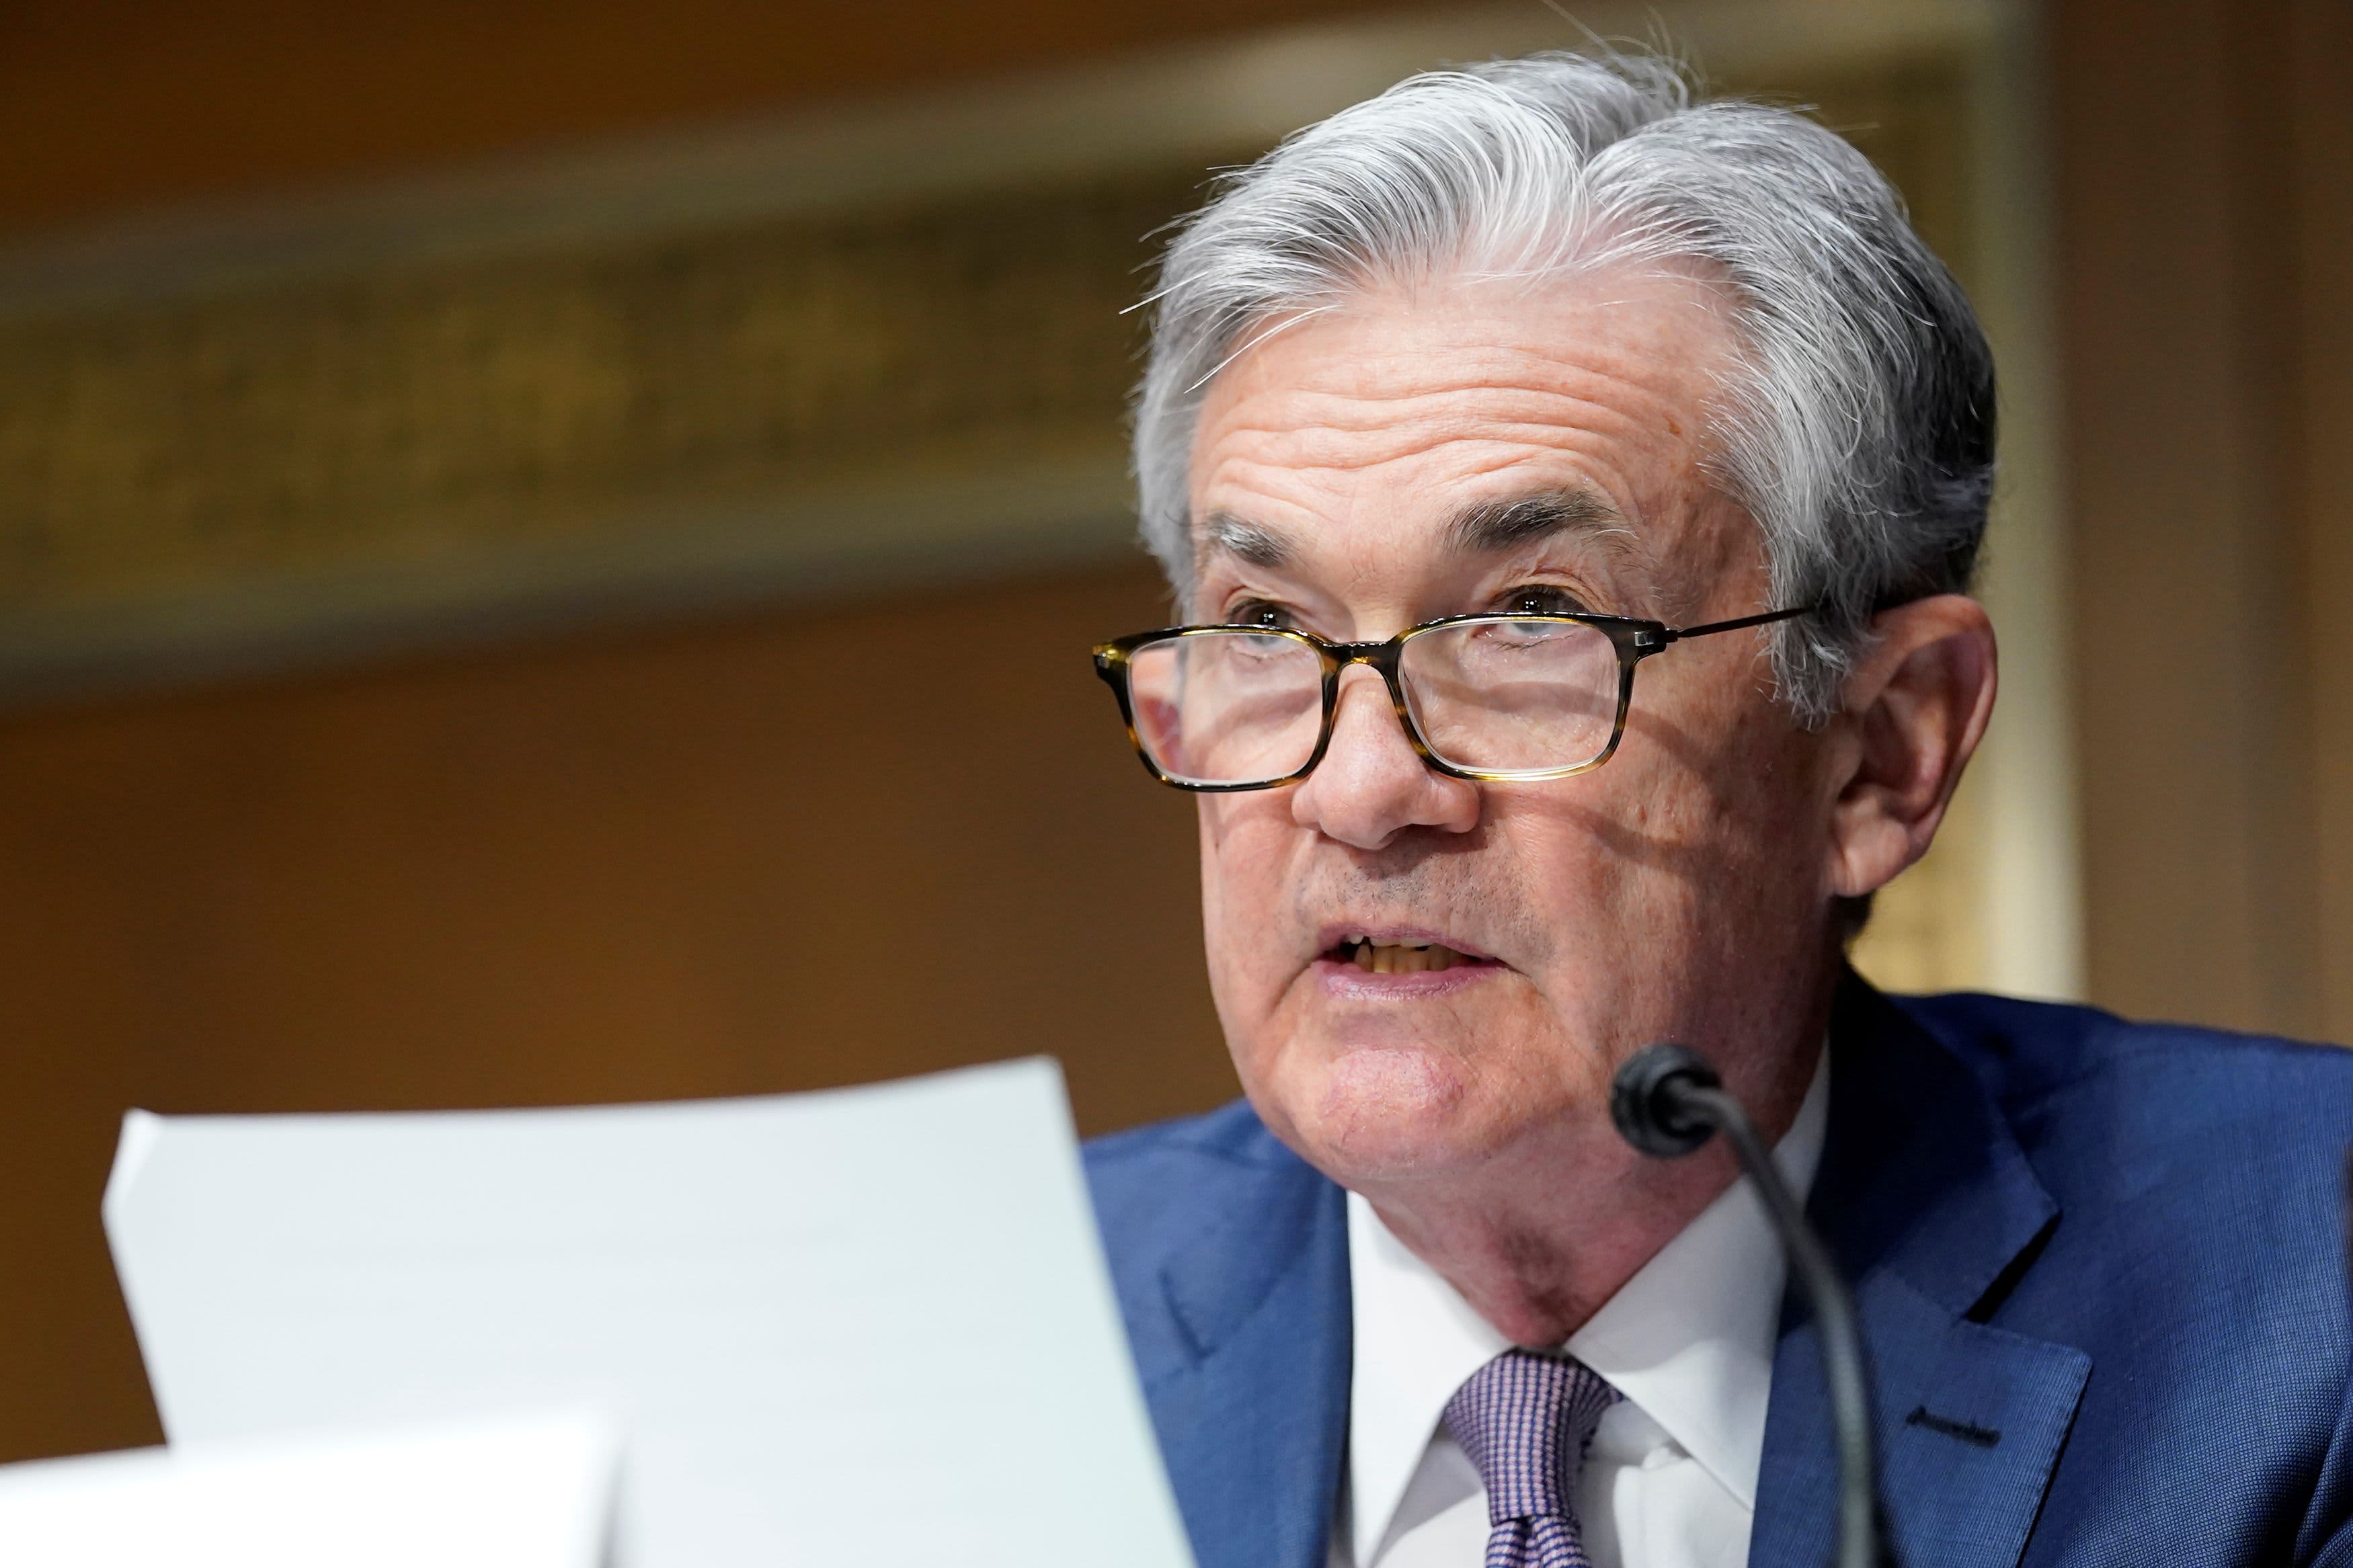 The Fed will examine the risks that climate change poses to the financial system